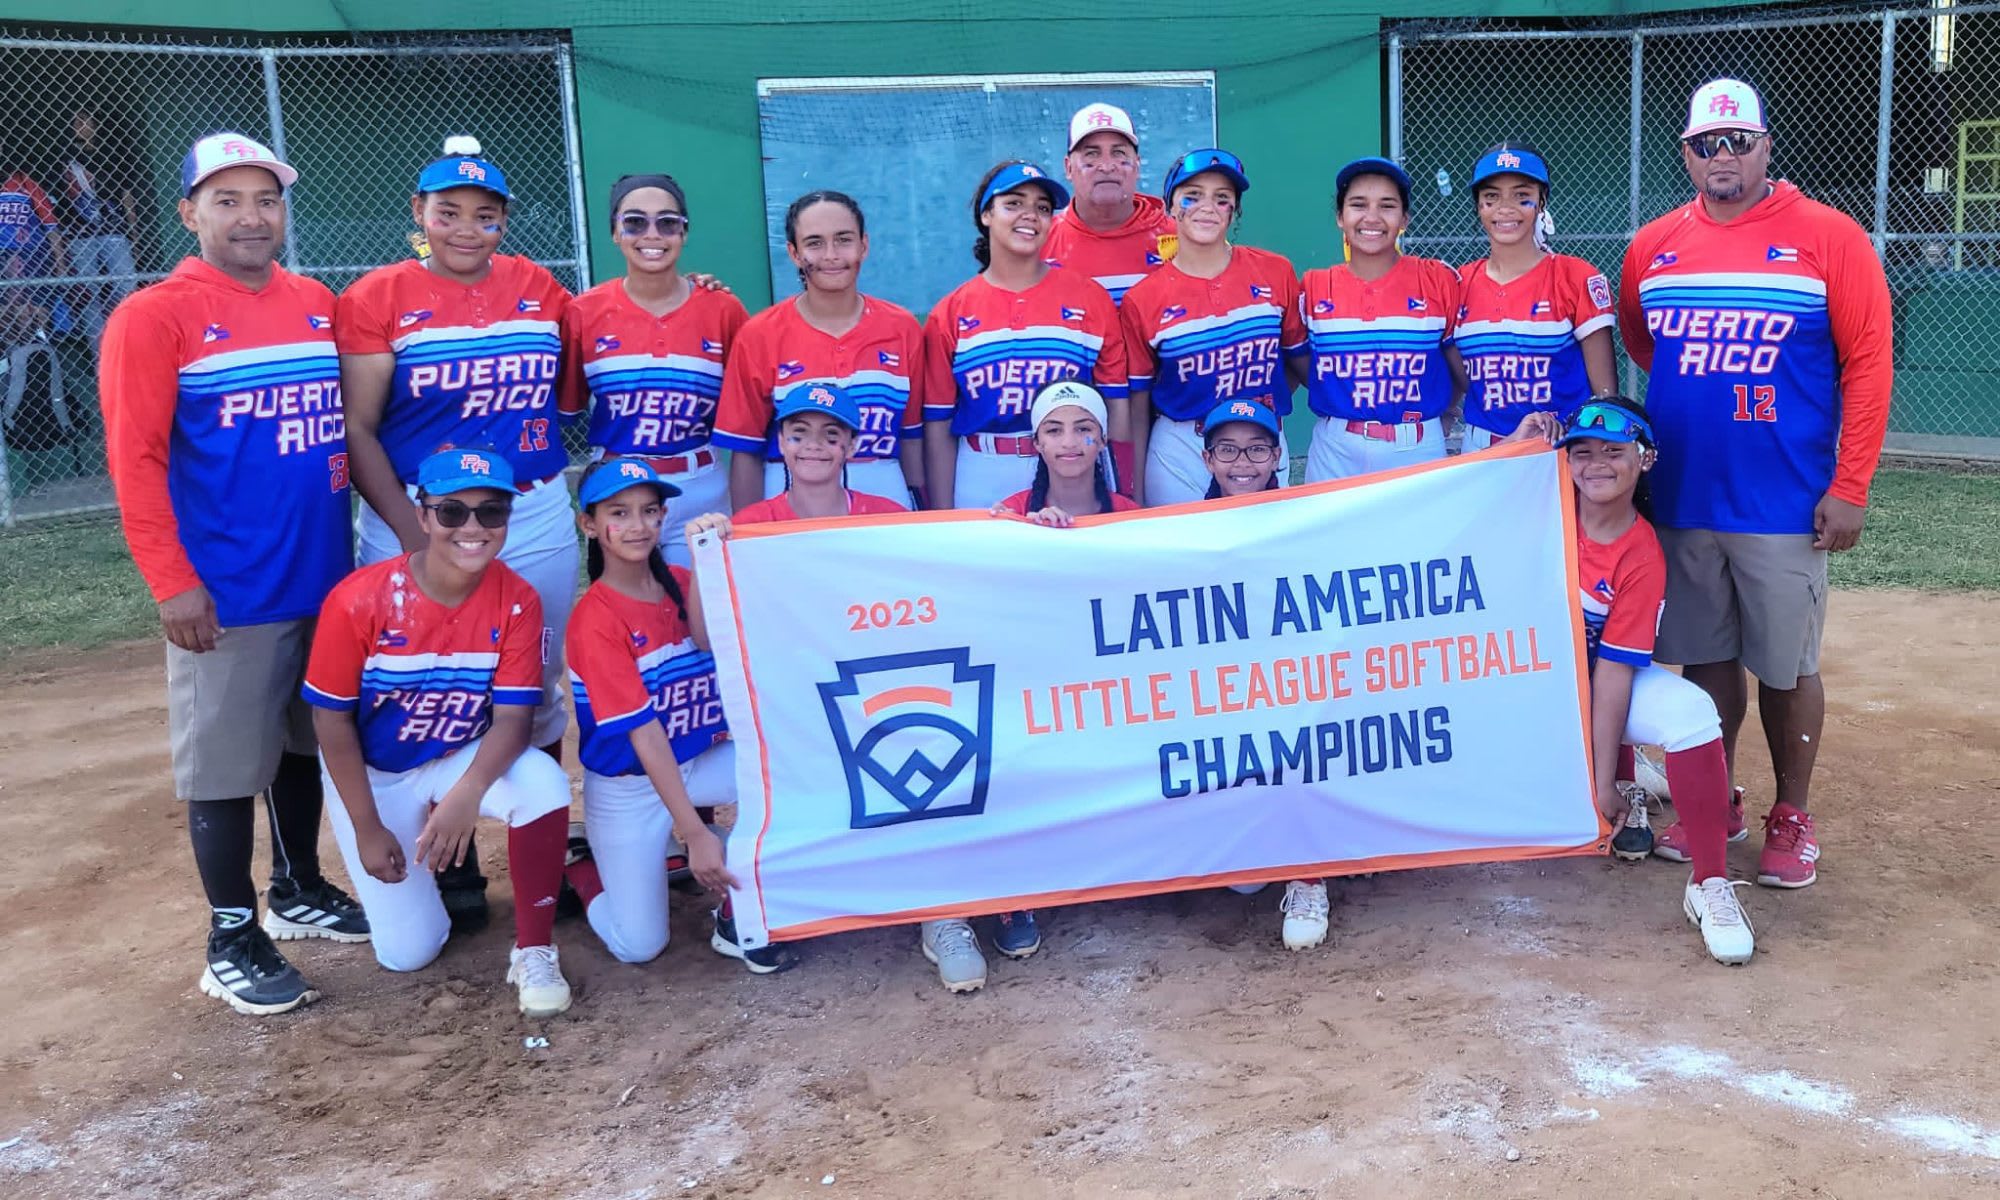 Project Béisbol  Empowering underserved youth in Latin America through  baseball and softball